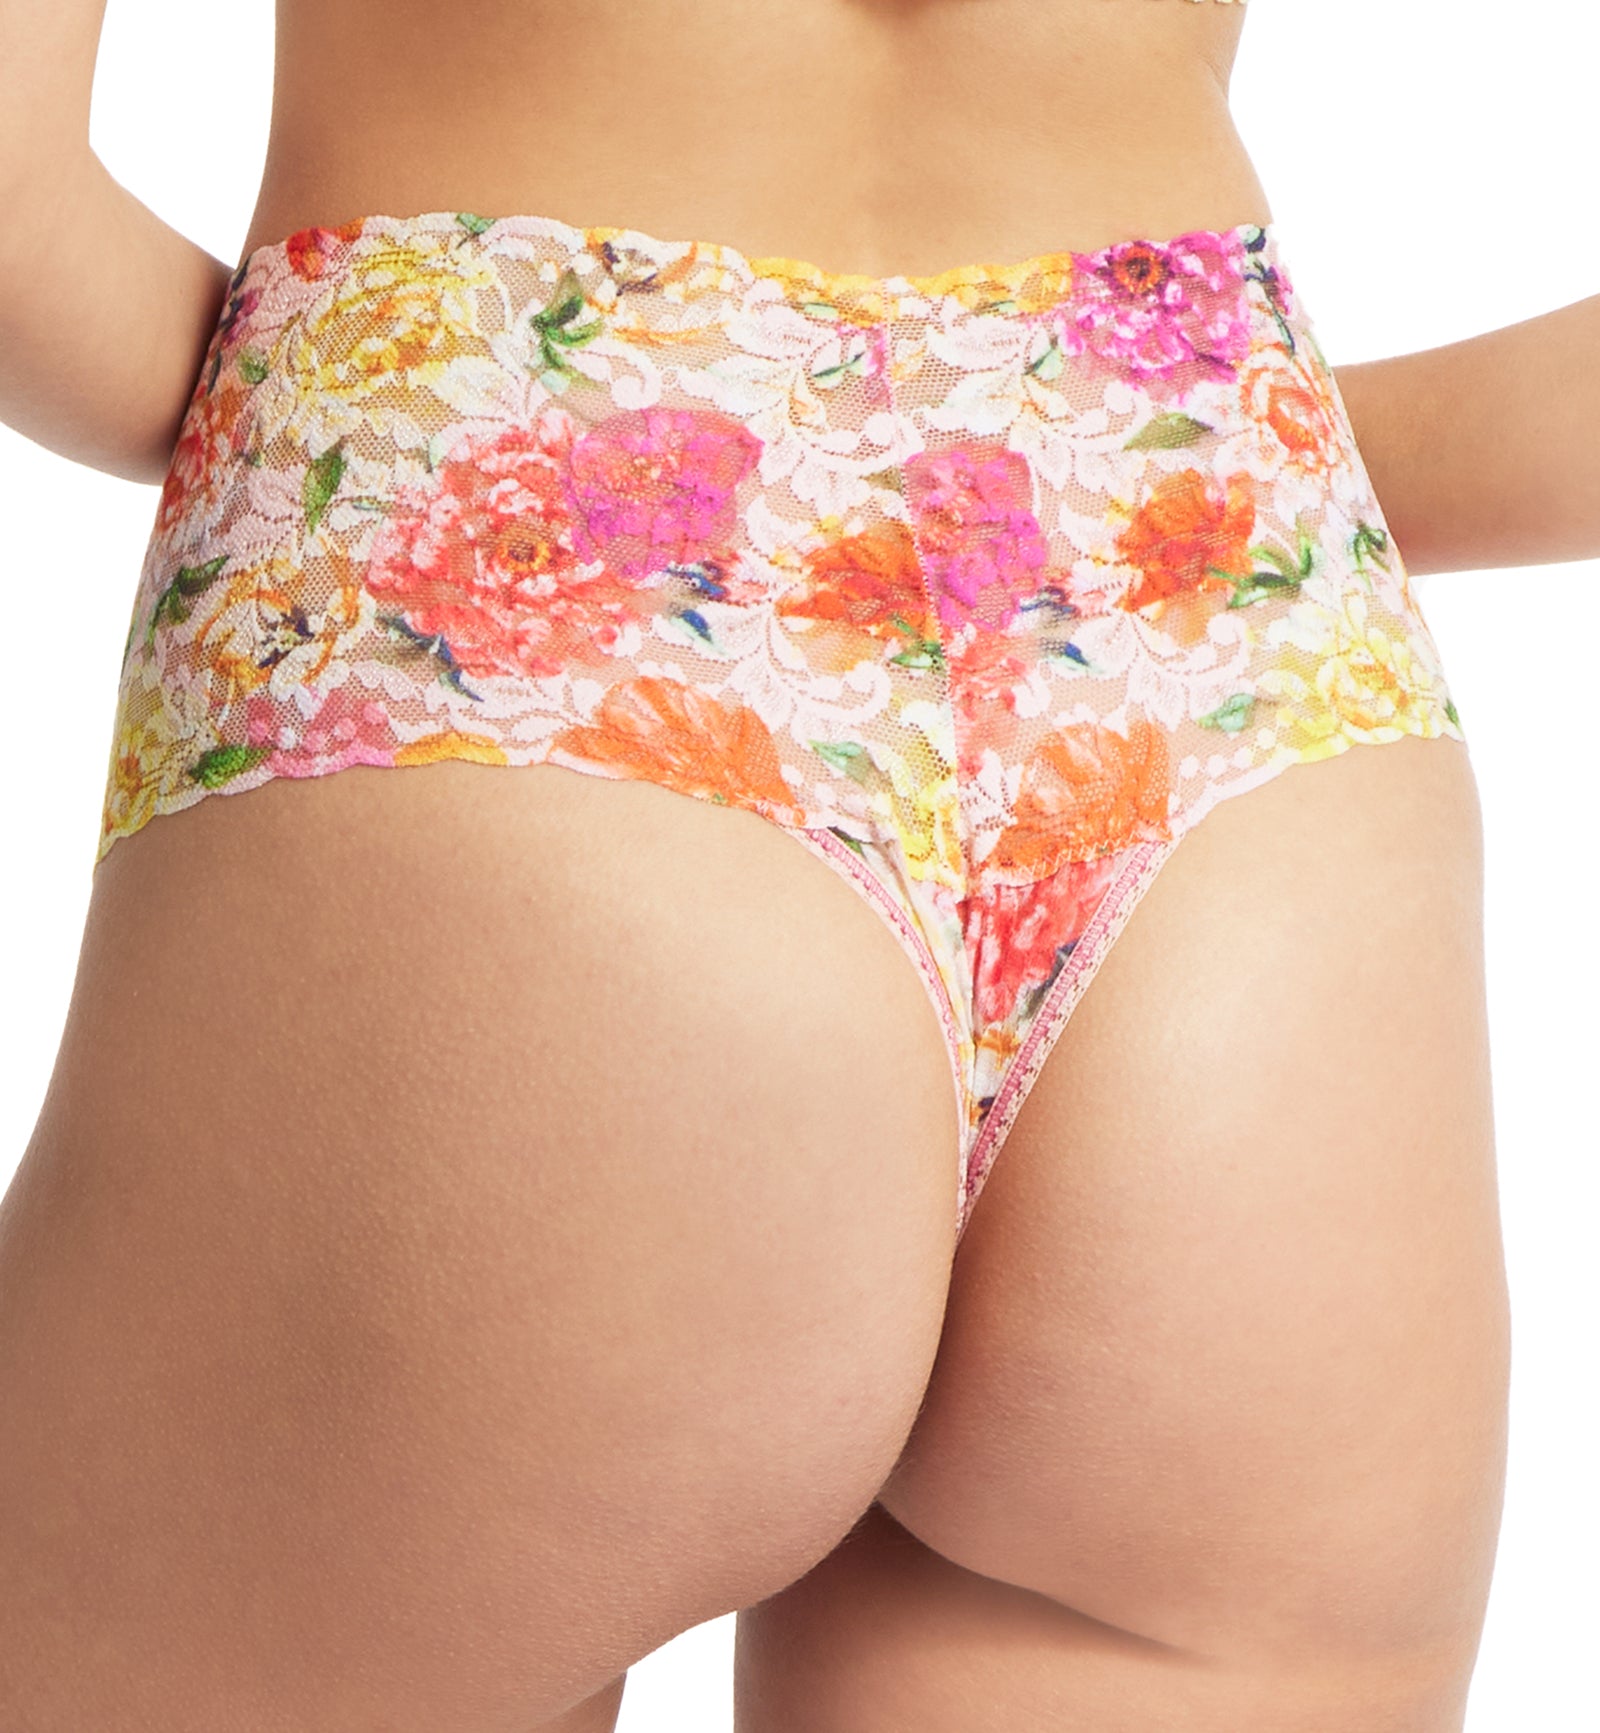 Hanky Panky Printed Retro Lace Thong (PR9K1926),Bring Me Flowers - Bring Me Flowers,One Size